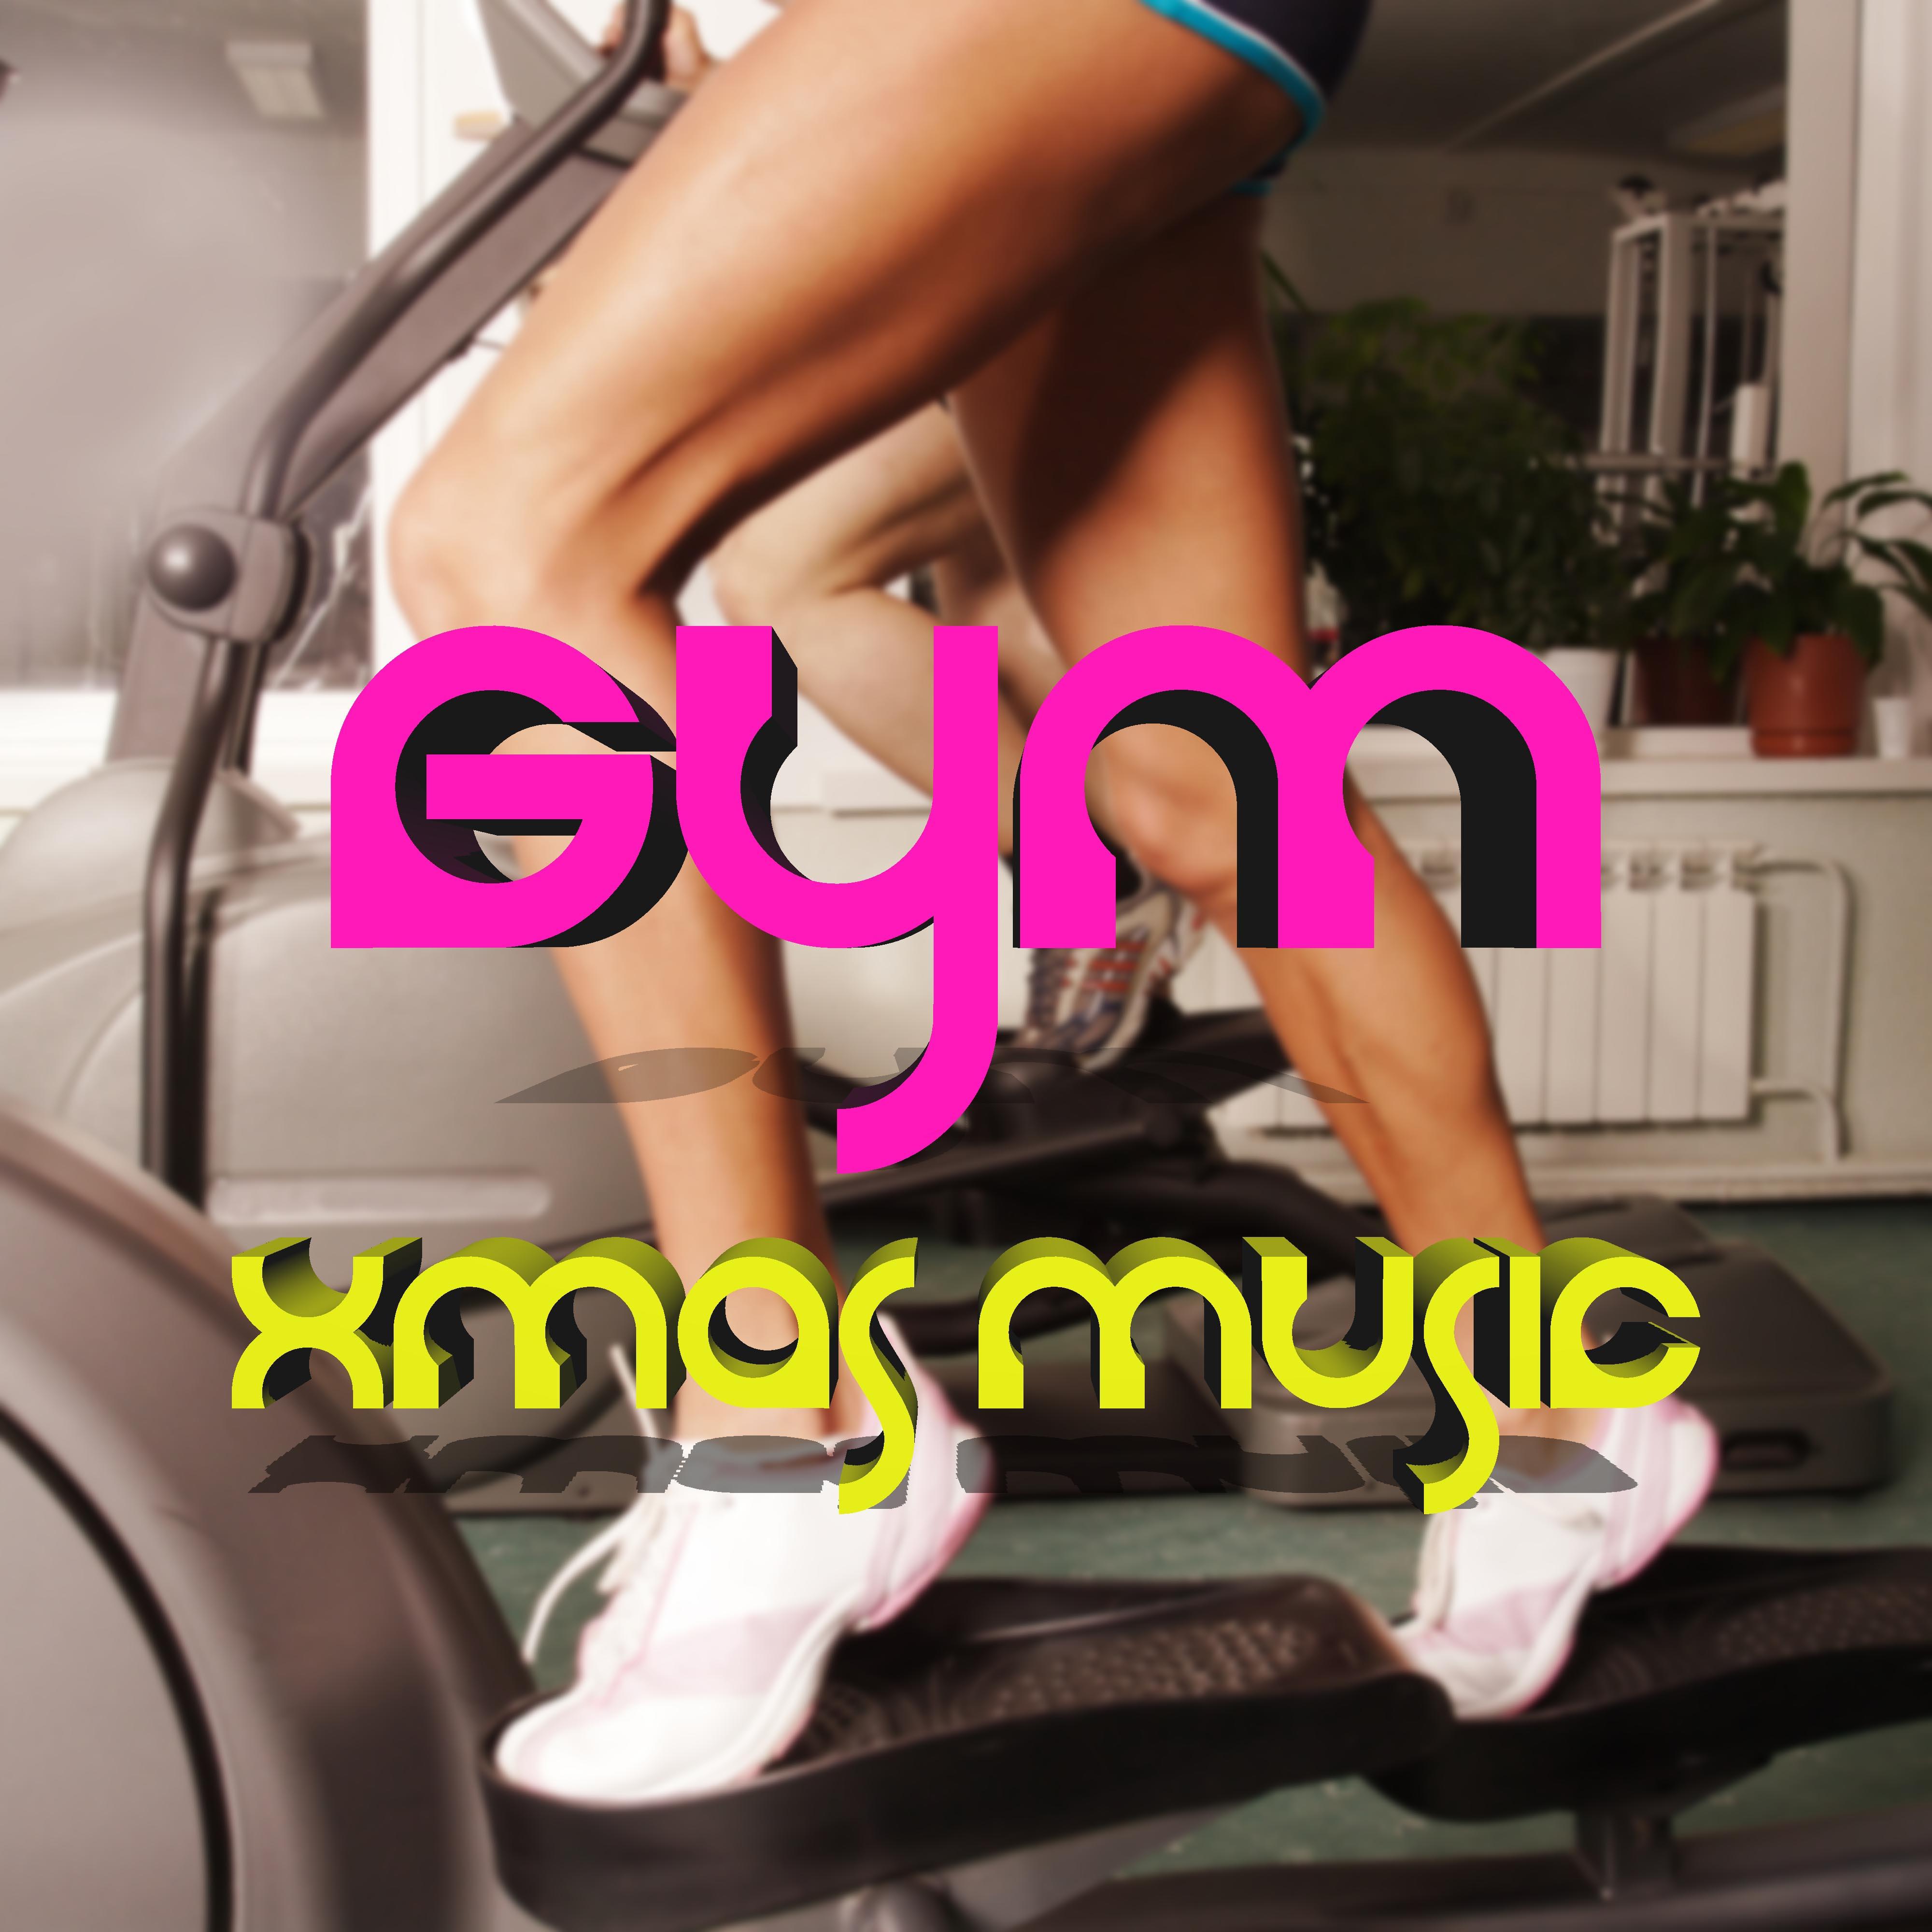 Gym Xmas Music: the Best Christmas Hits for Amazing Workout Sessions for your Holiday with House and New Age Beats